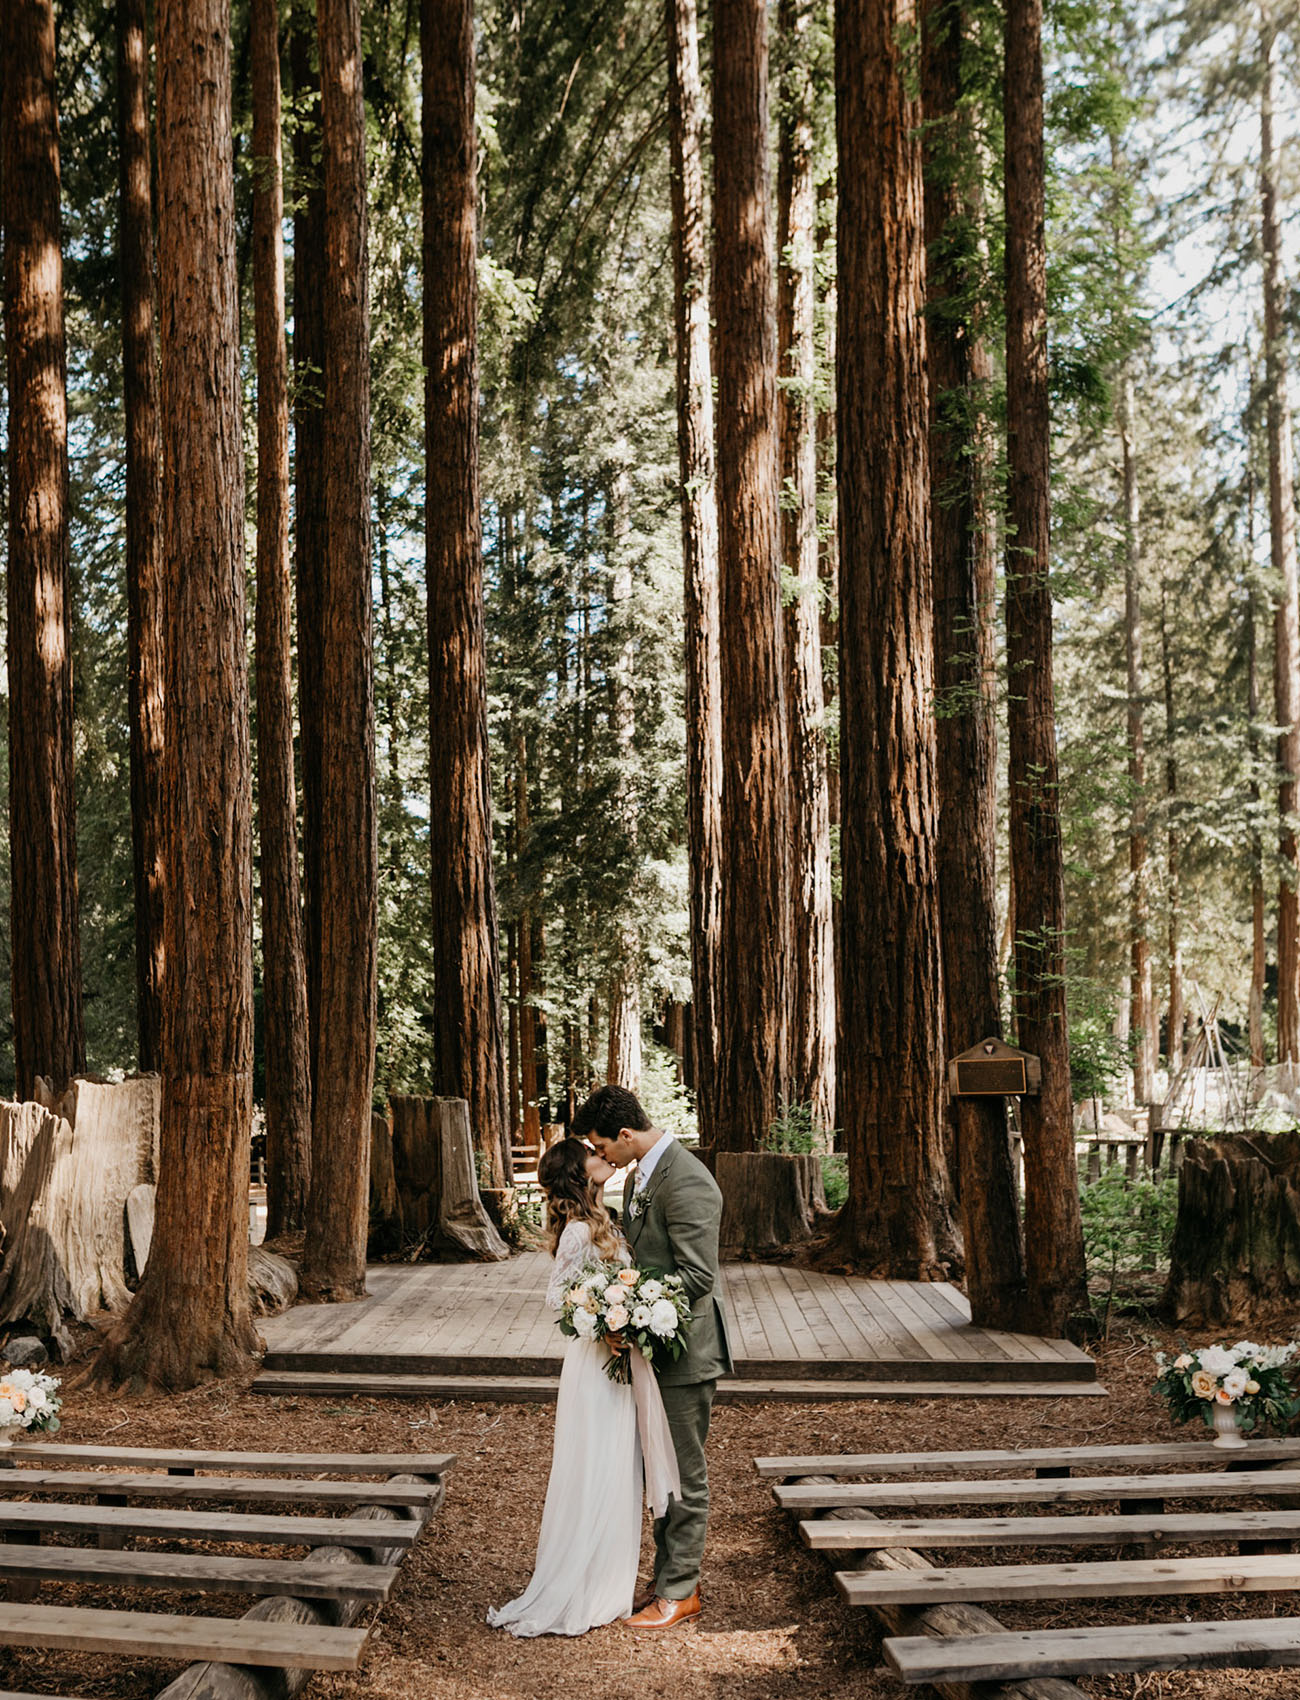 Head into the Woods with 14 Must-See Forest Weddings! - Green Wedding Shoes